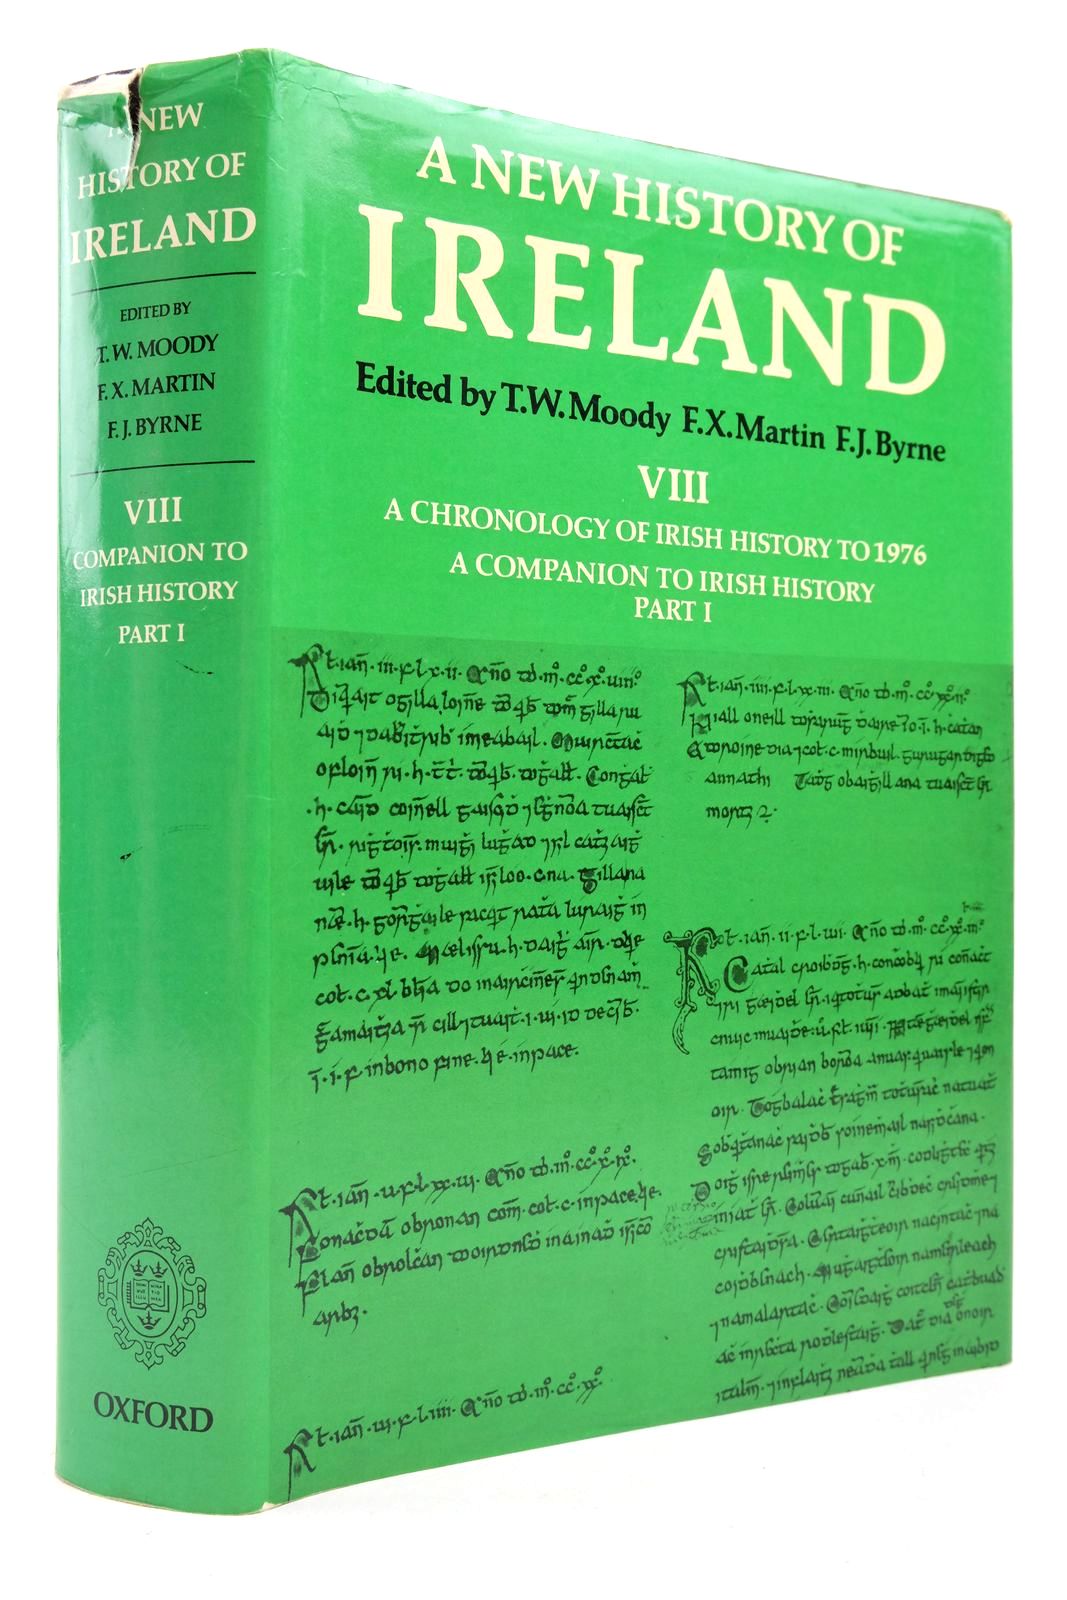 Photo of A NEW HISTORY OF IRELAND VIII: A CHRONOLOGY OF IRISH HISTORY TO 1976 written by Moody, T.W. Martin, F.X. Byrne, F.J. published by Oxford at the Clarendon Press (STOCK CODE: 2140525)  for sale by Stella & Rose's Books